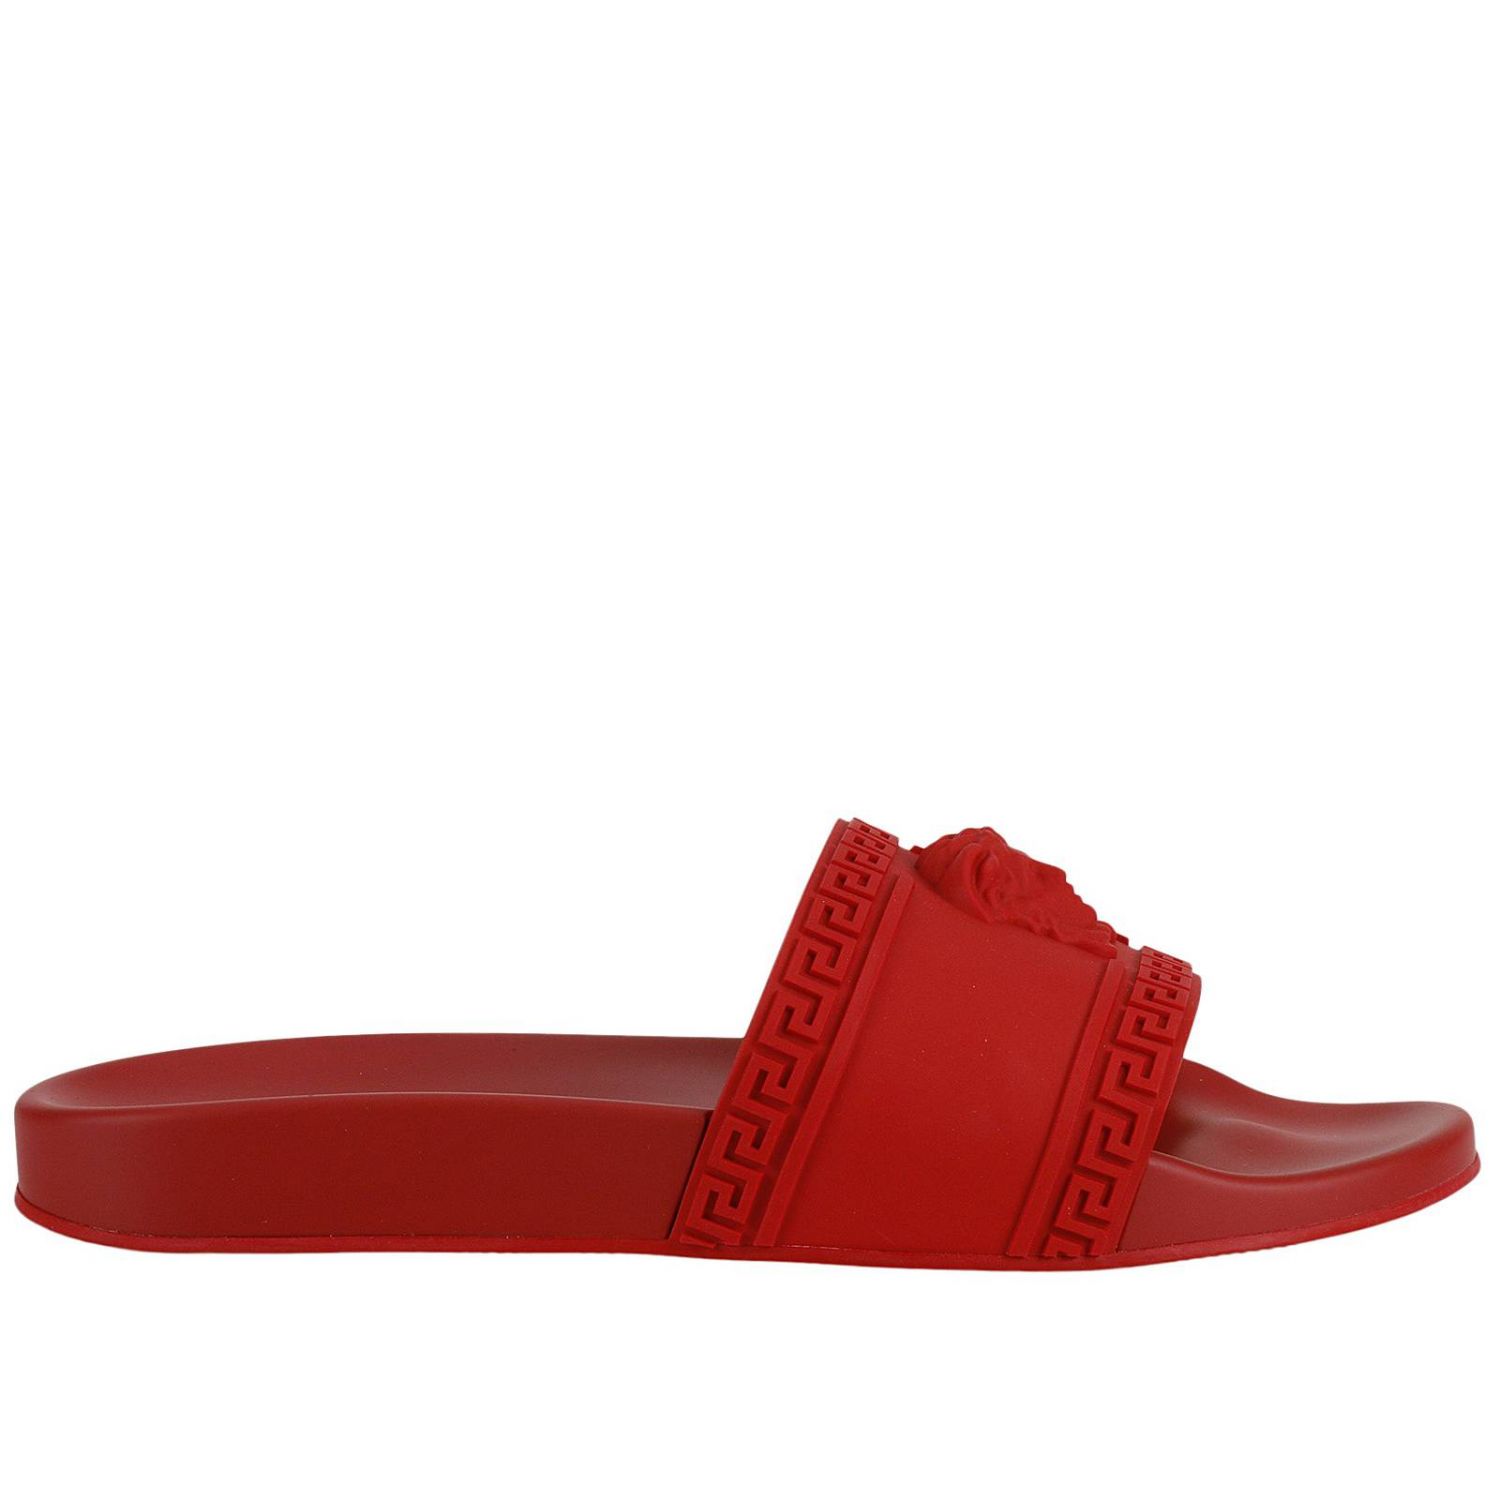 Versace Outlet: Shoes men - Red | Sandals Versace DSU5883 DGO9G GIGLIO.COM